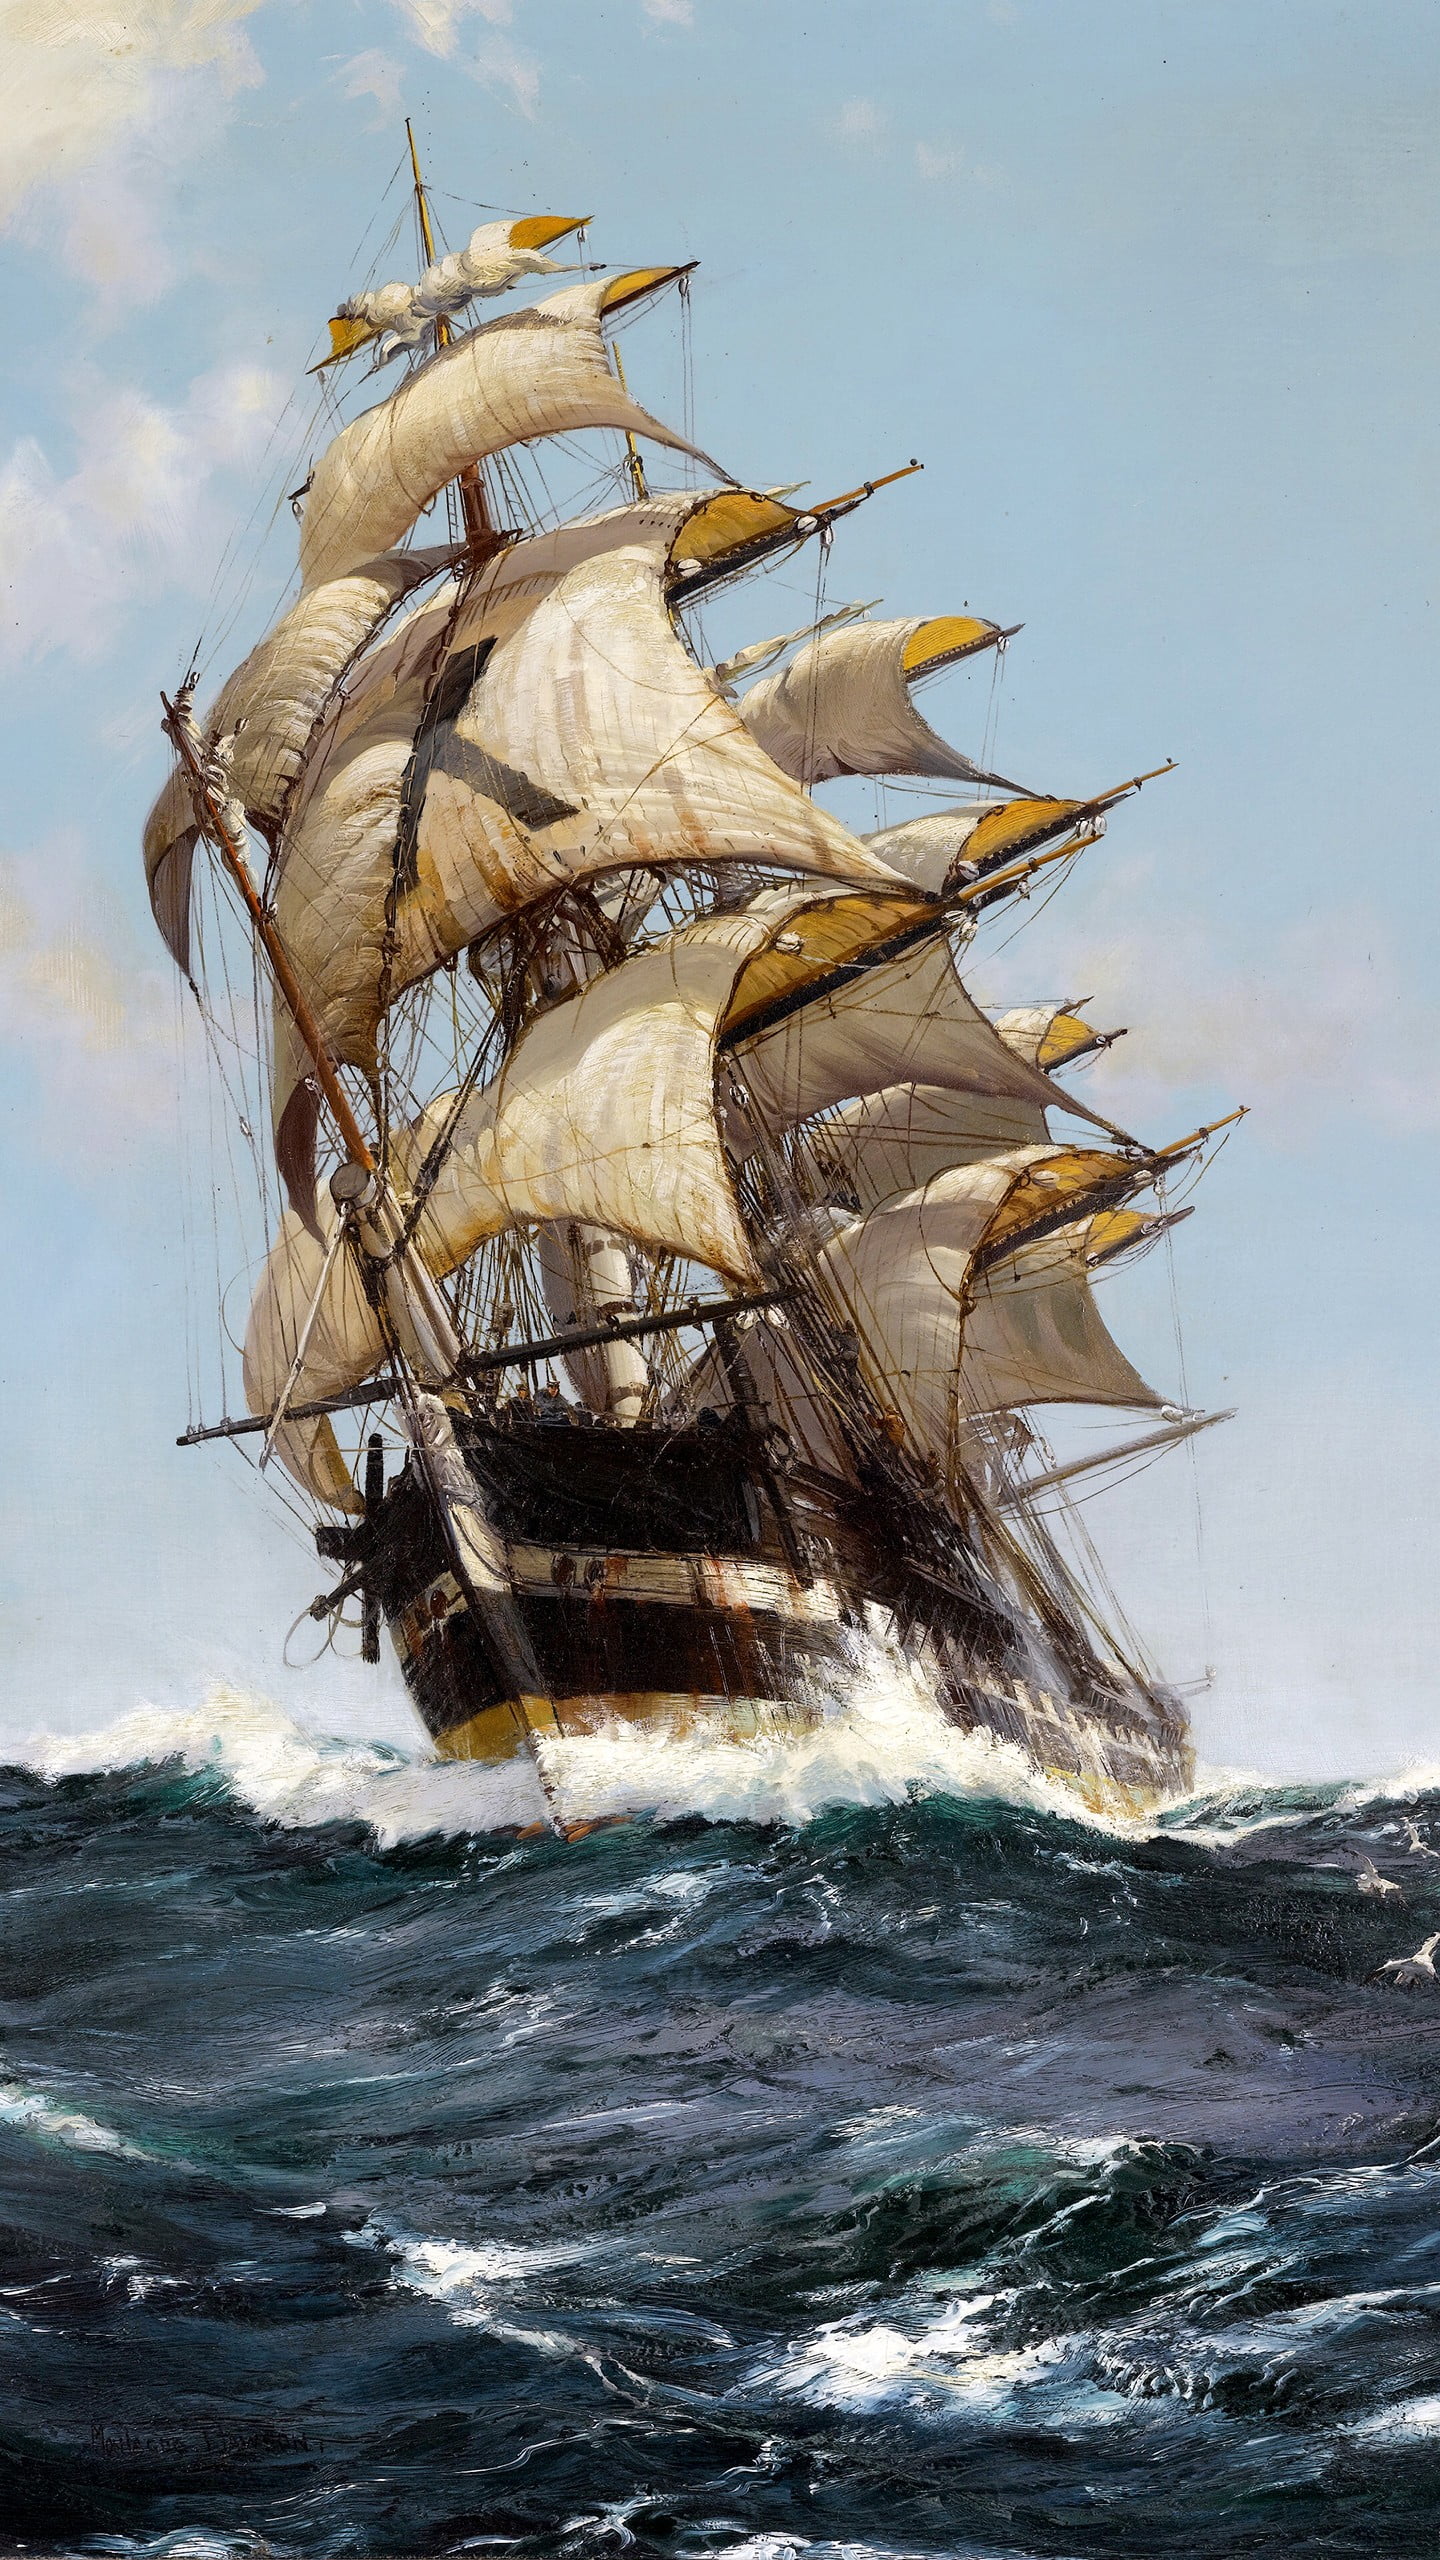 Brown and beige sail boat illustration